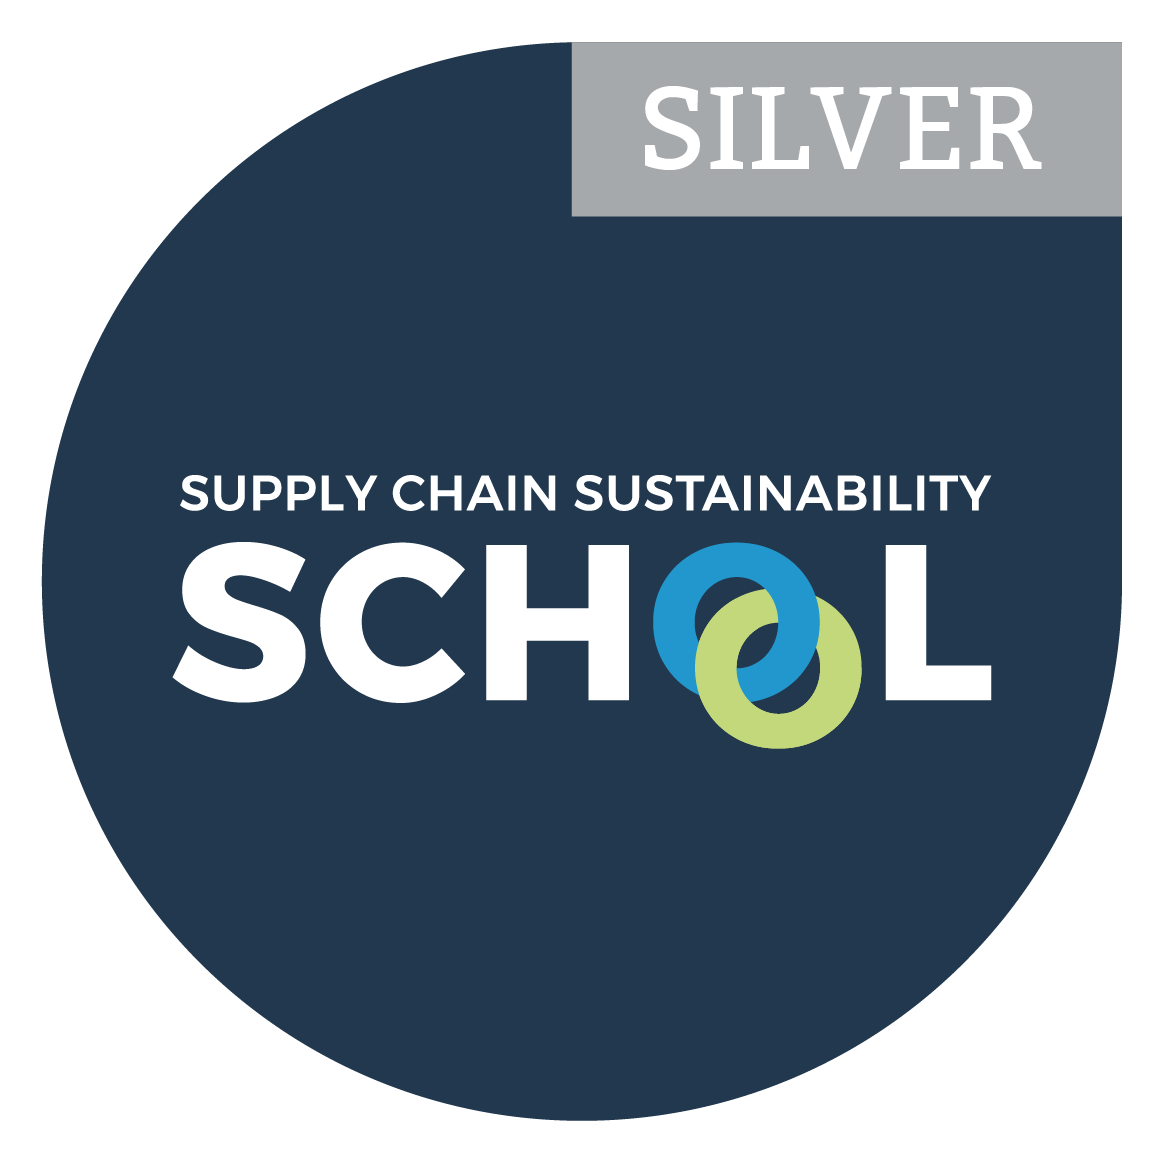 We are Now a Member of Supply Chain Sustainability School